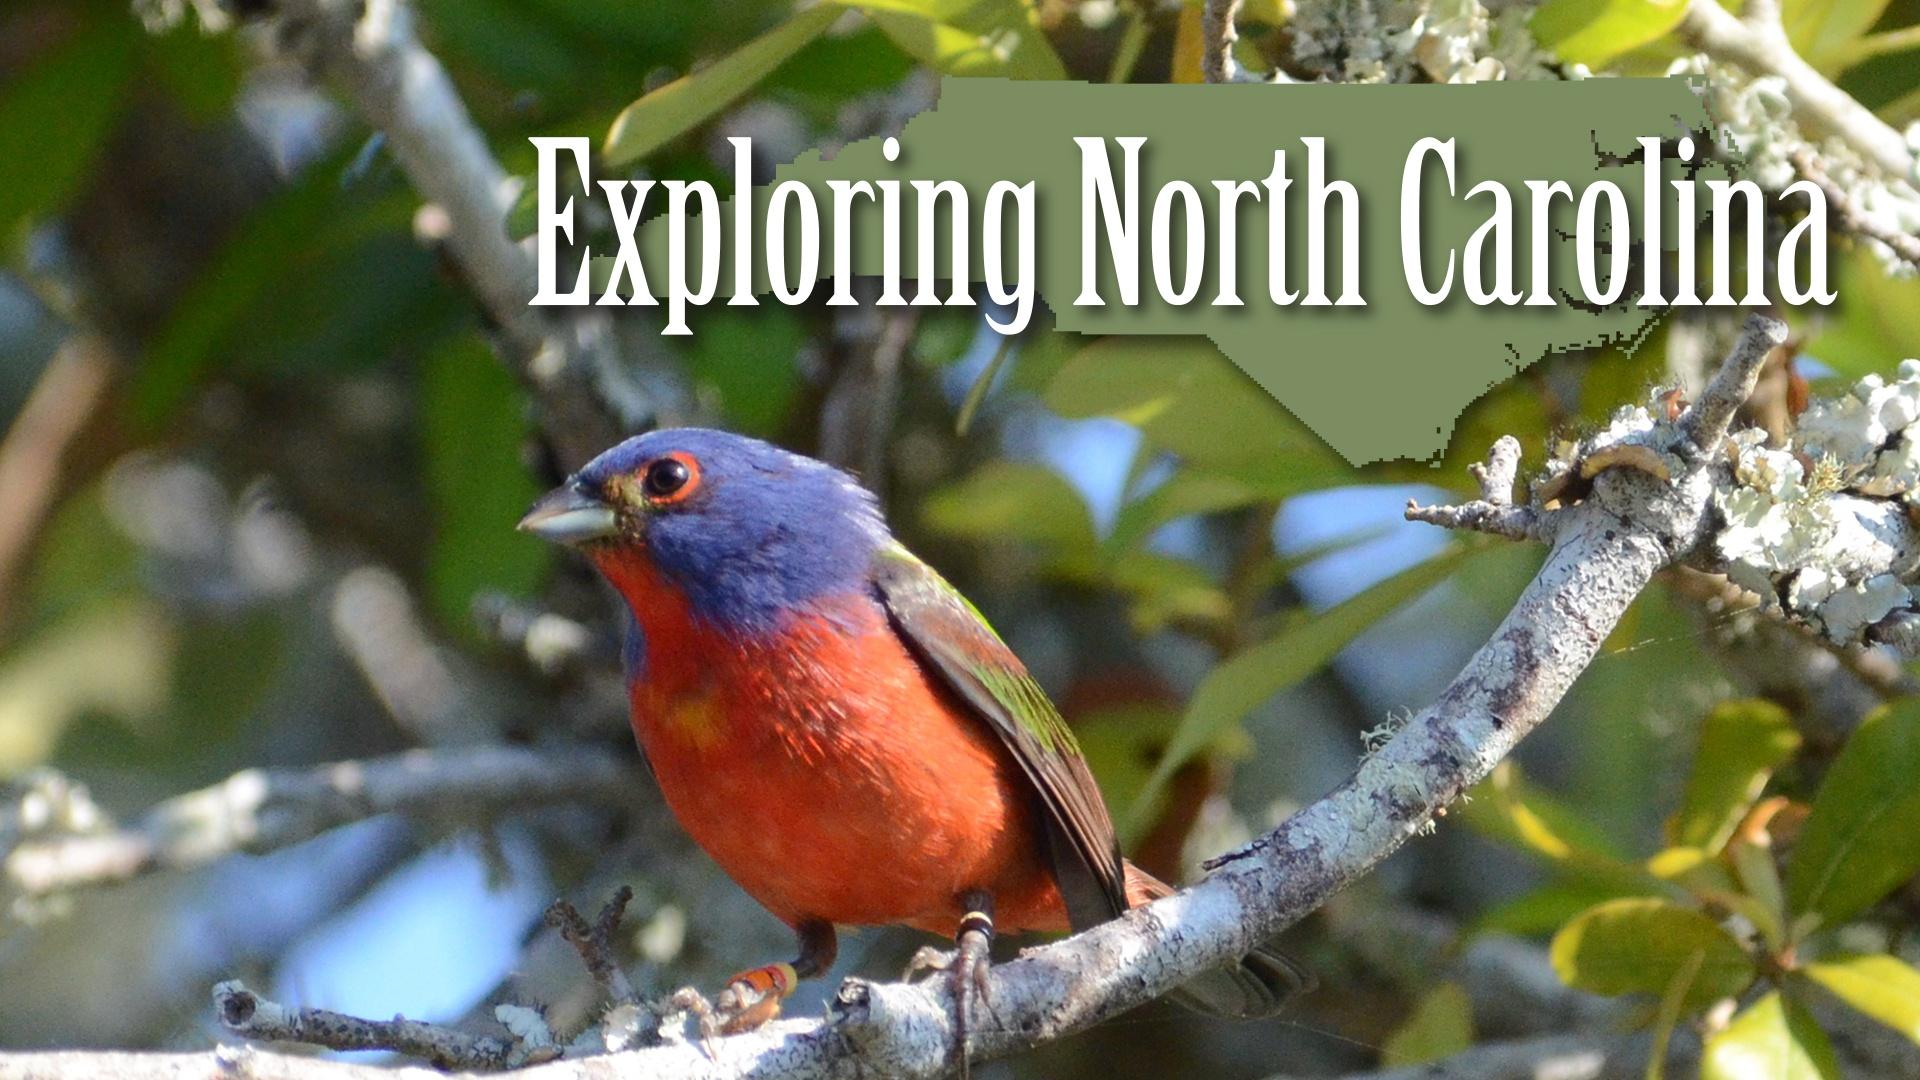 Learn More About Exploring North Carolina